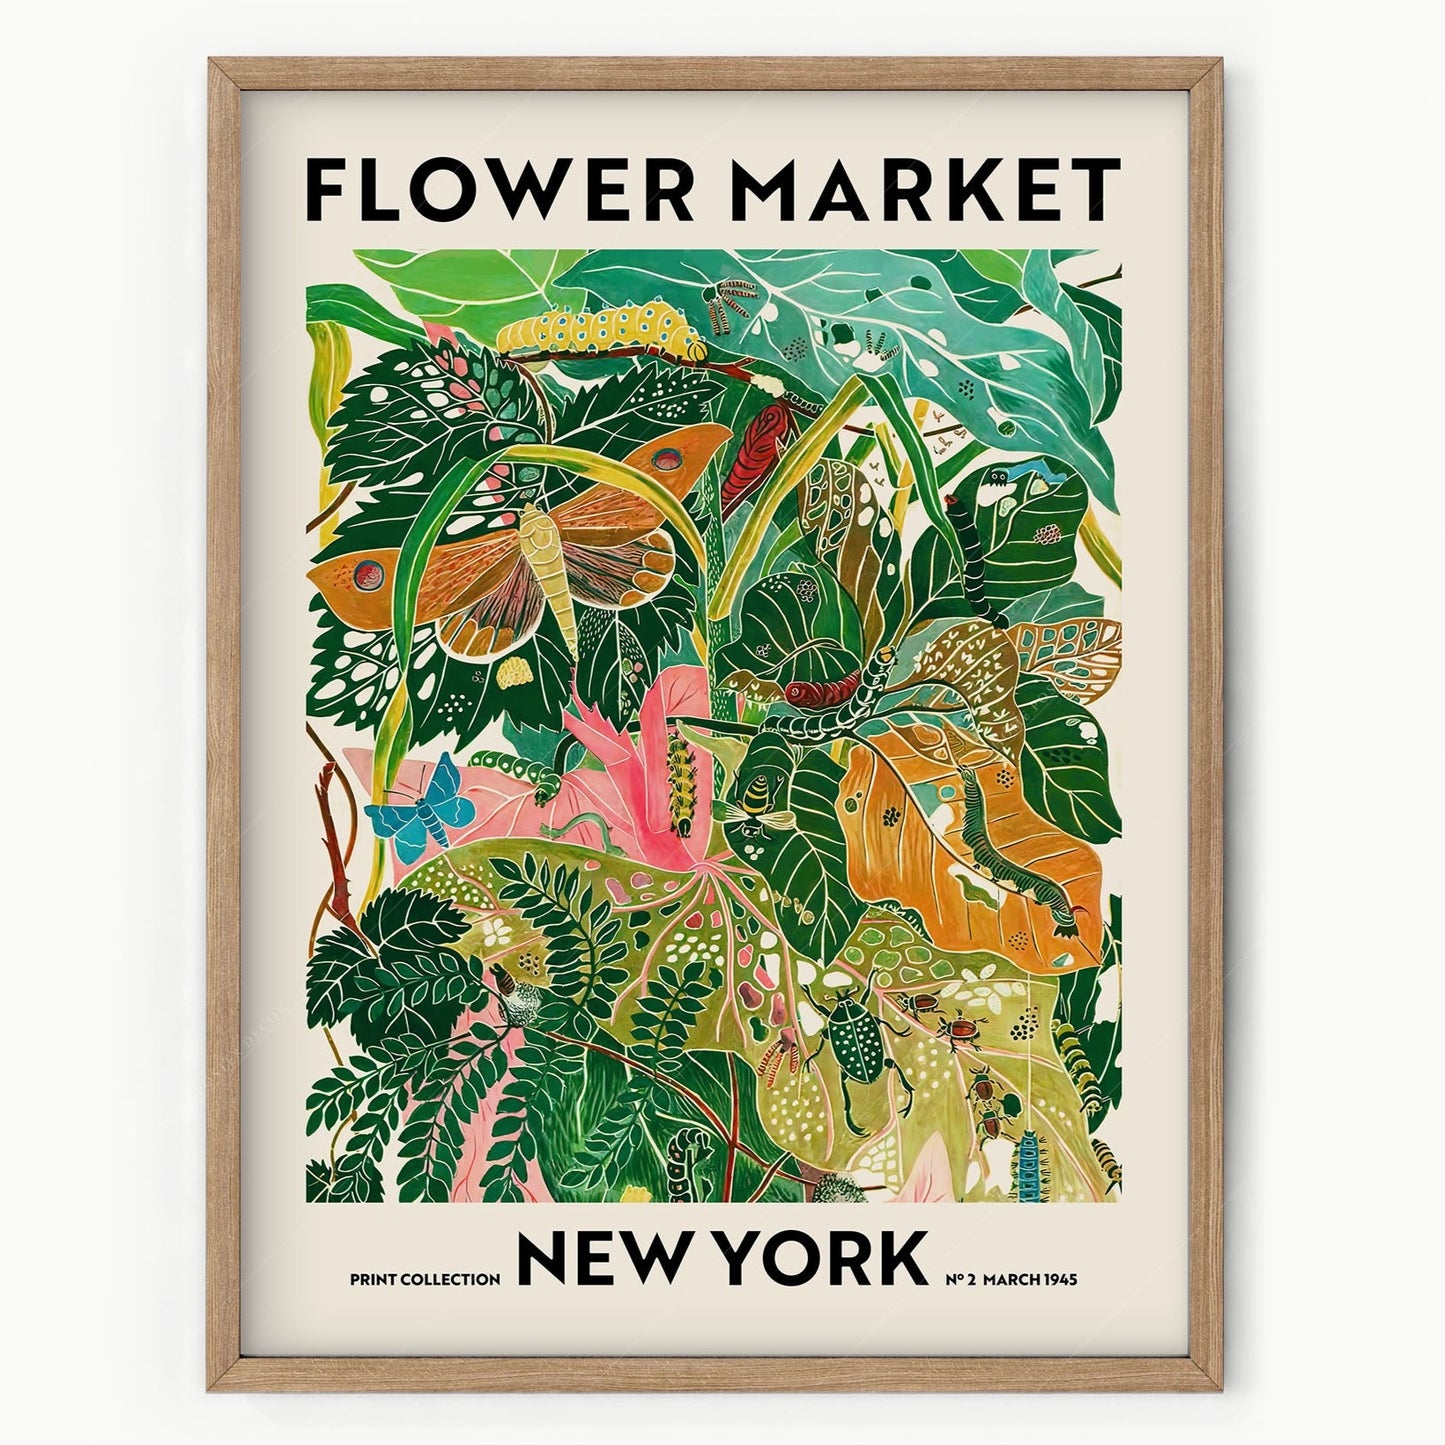 Flower Market New York, Famous City Poster, Travel Gift Idea, Floral Wall Art